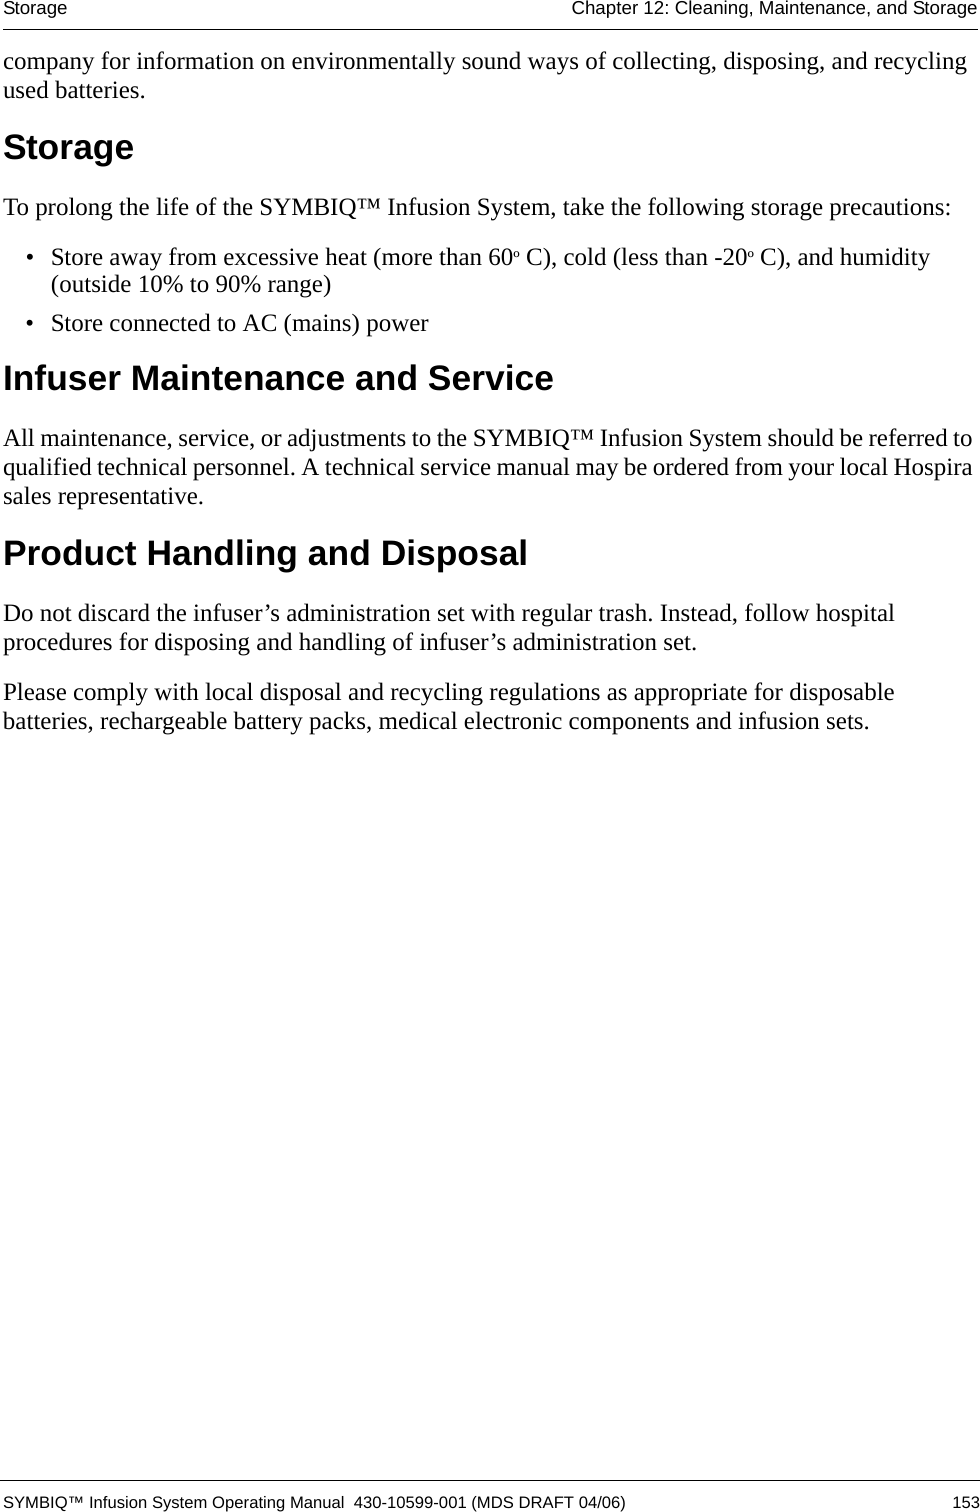 Storage Chapter 12: Cleaning, Maintenance, and Storage SYMBIQ™ Infusion System Operating Manual  430-10599-001 (MDS DRAFT 04/06) 153company for information on environmentally sound ways of collecting, disposing, and recycling used batteries.StorageTo prolong the life of the SYMBIQ™ Infusion System, take the following storage precautions:• Store away from excessive heat (more than 60º C), cold (less than -20º C), and humidity (outside 10% to 90% range)• Store connected to AC (mains) power Infuser Maintenance and ServiceAll maintenance, service, or adjustments to the SYMBIQ™ Infusion System should be referred to qualified technical personnel. A technical service manual may be ordered from your local Hospira sales representative.Product Handling and DisposalDo not discard the infuser’s administration set with regular trash. Instead, follow hospital procedures for disposing and handling of infuser’s administration set.Please comply with local disposal and recycling regulations as appropriate for disposable batteries, rechargeable battery packs, medical electronic components and infusion sets.